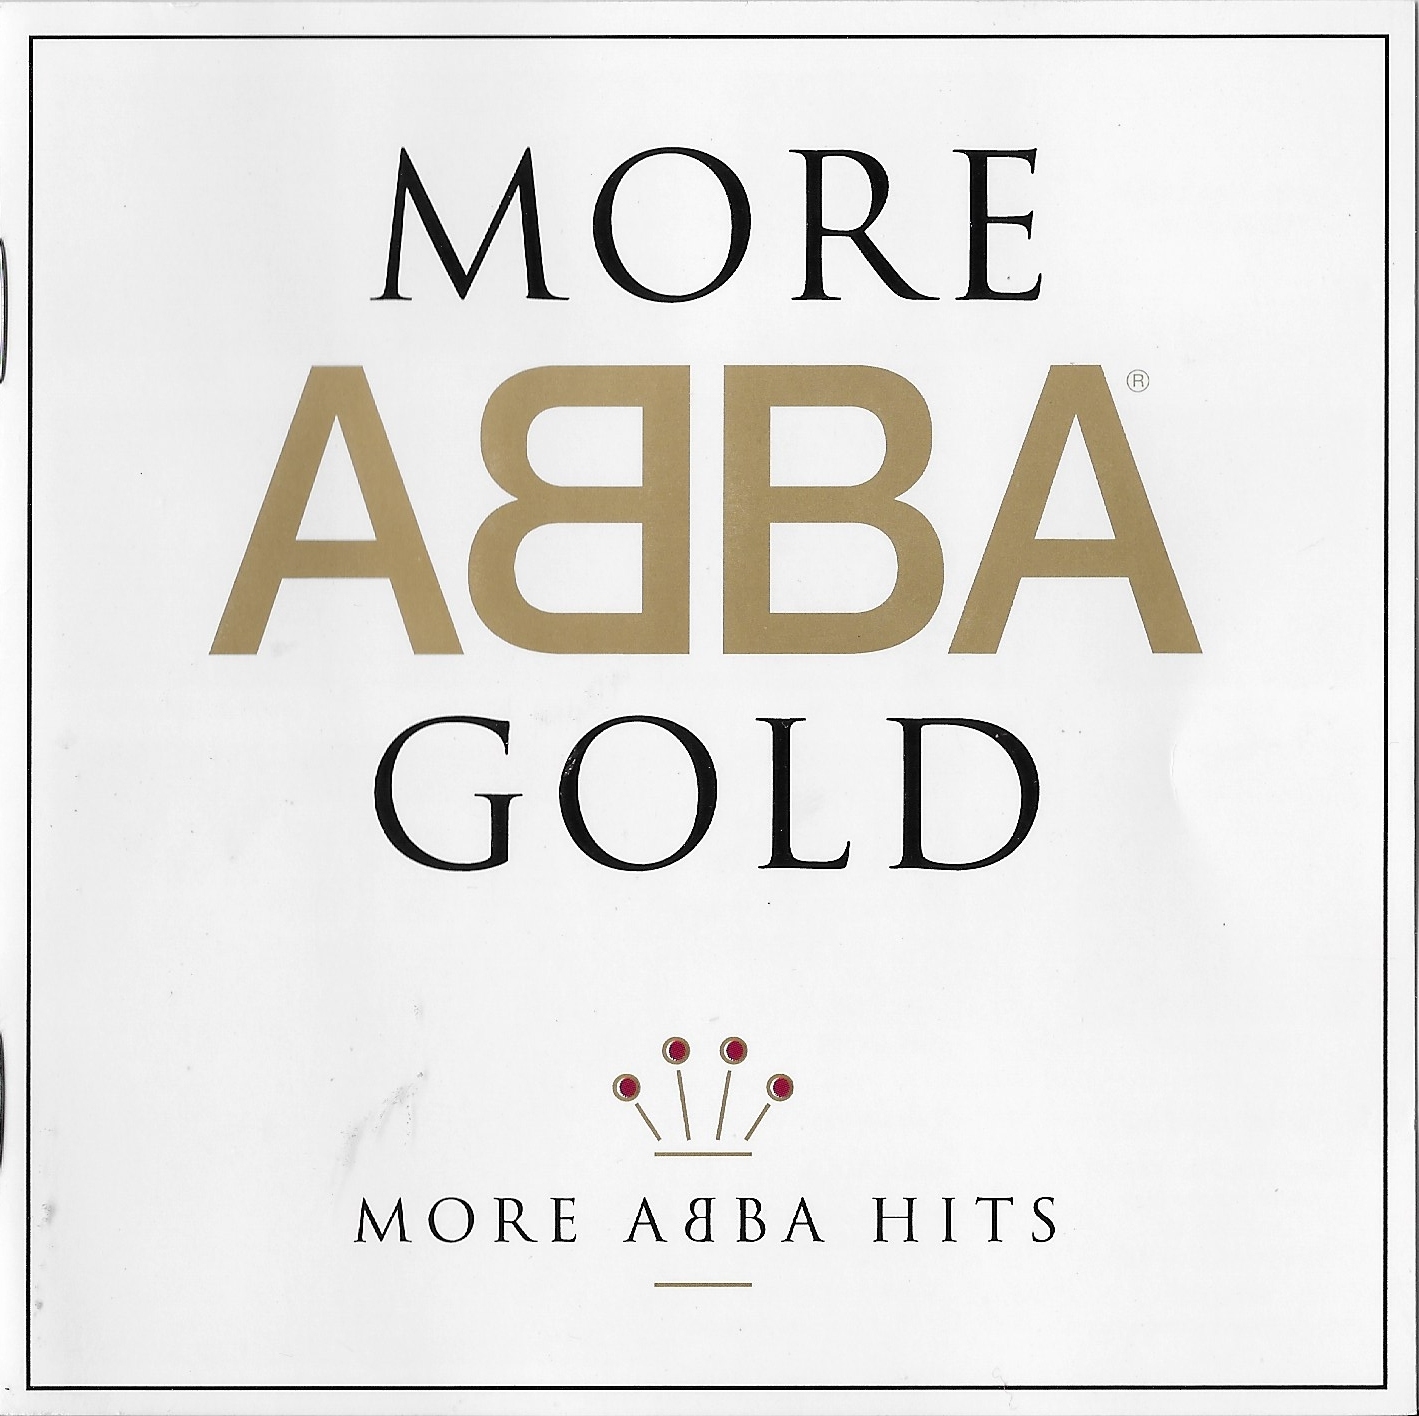 Picture of 519353 - 2 More Abba gold - More Abba hits by artist Abba 